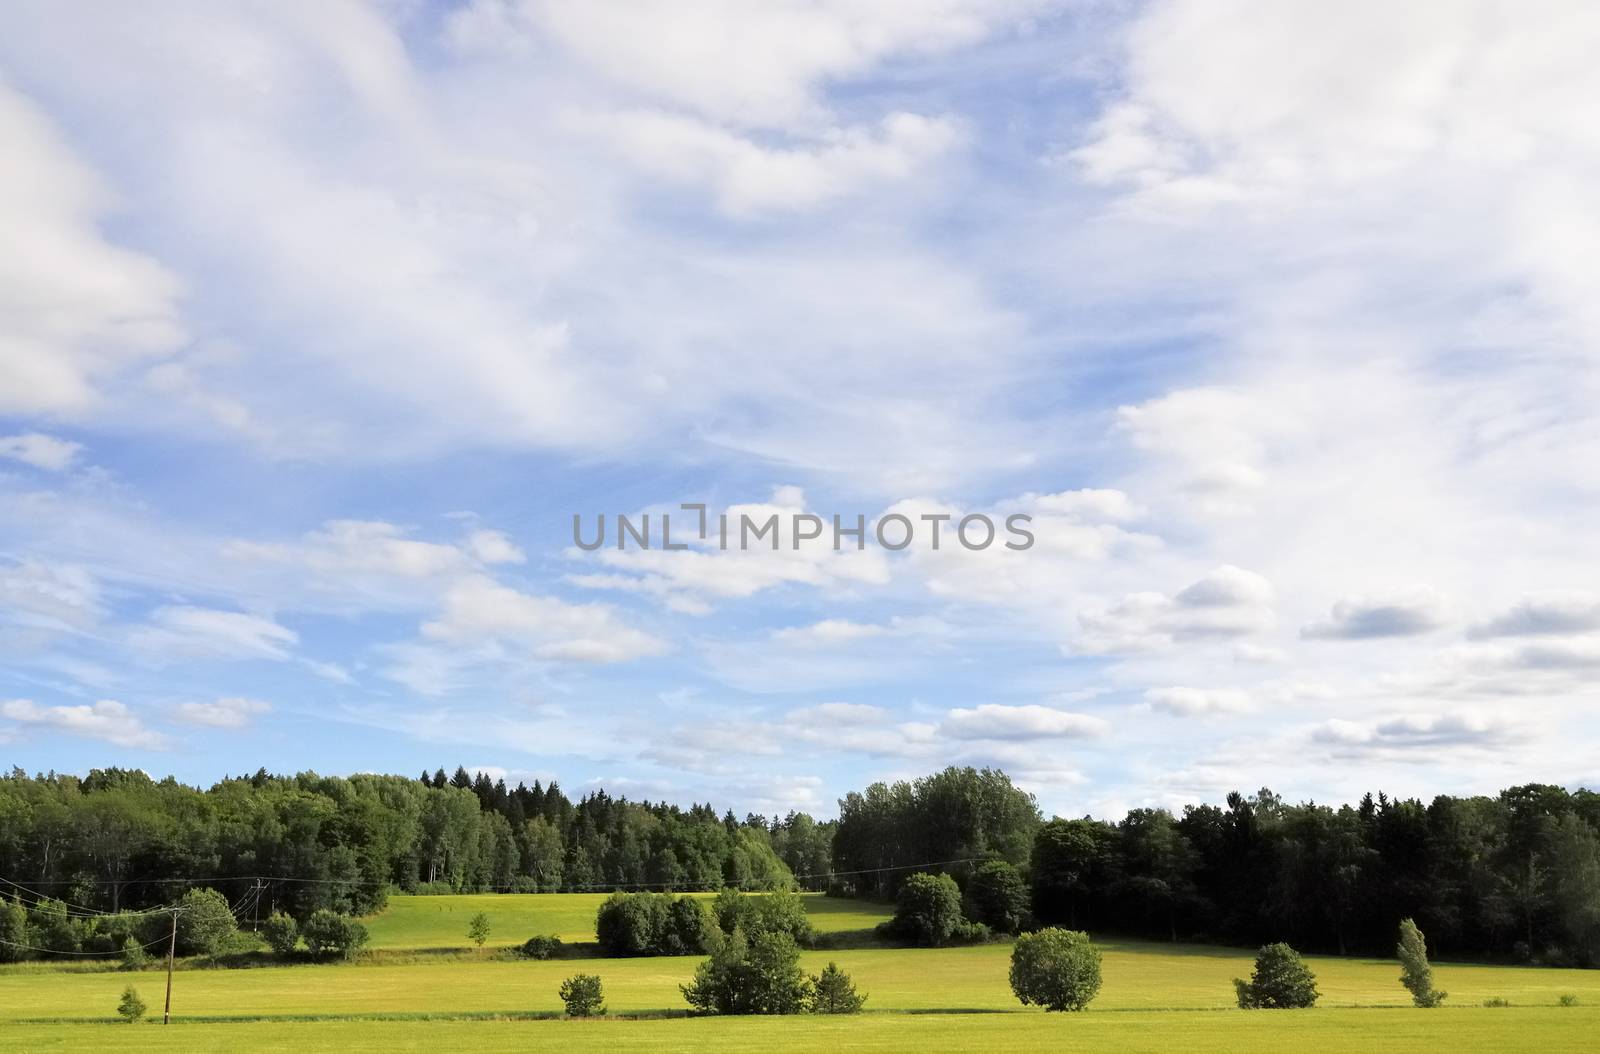 Trees on the horizon, on a bright summers day. Ekerö, Sweden.